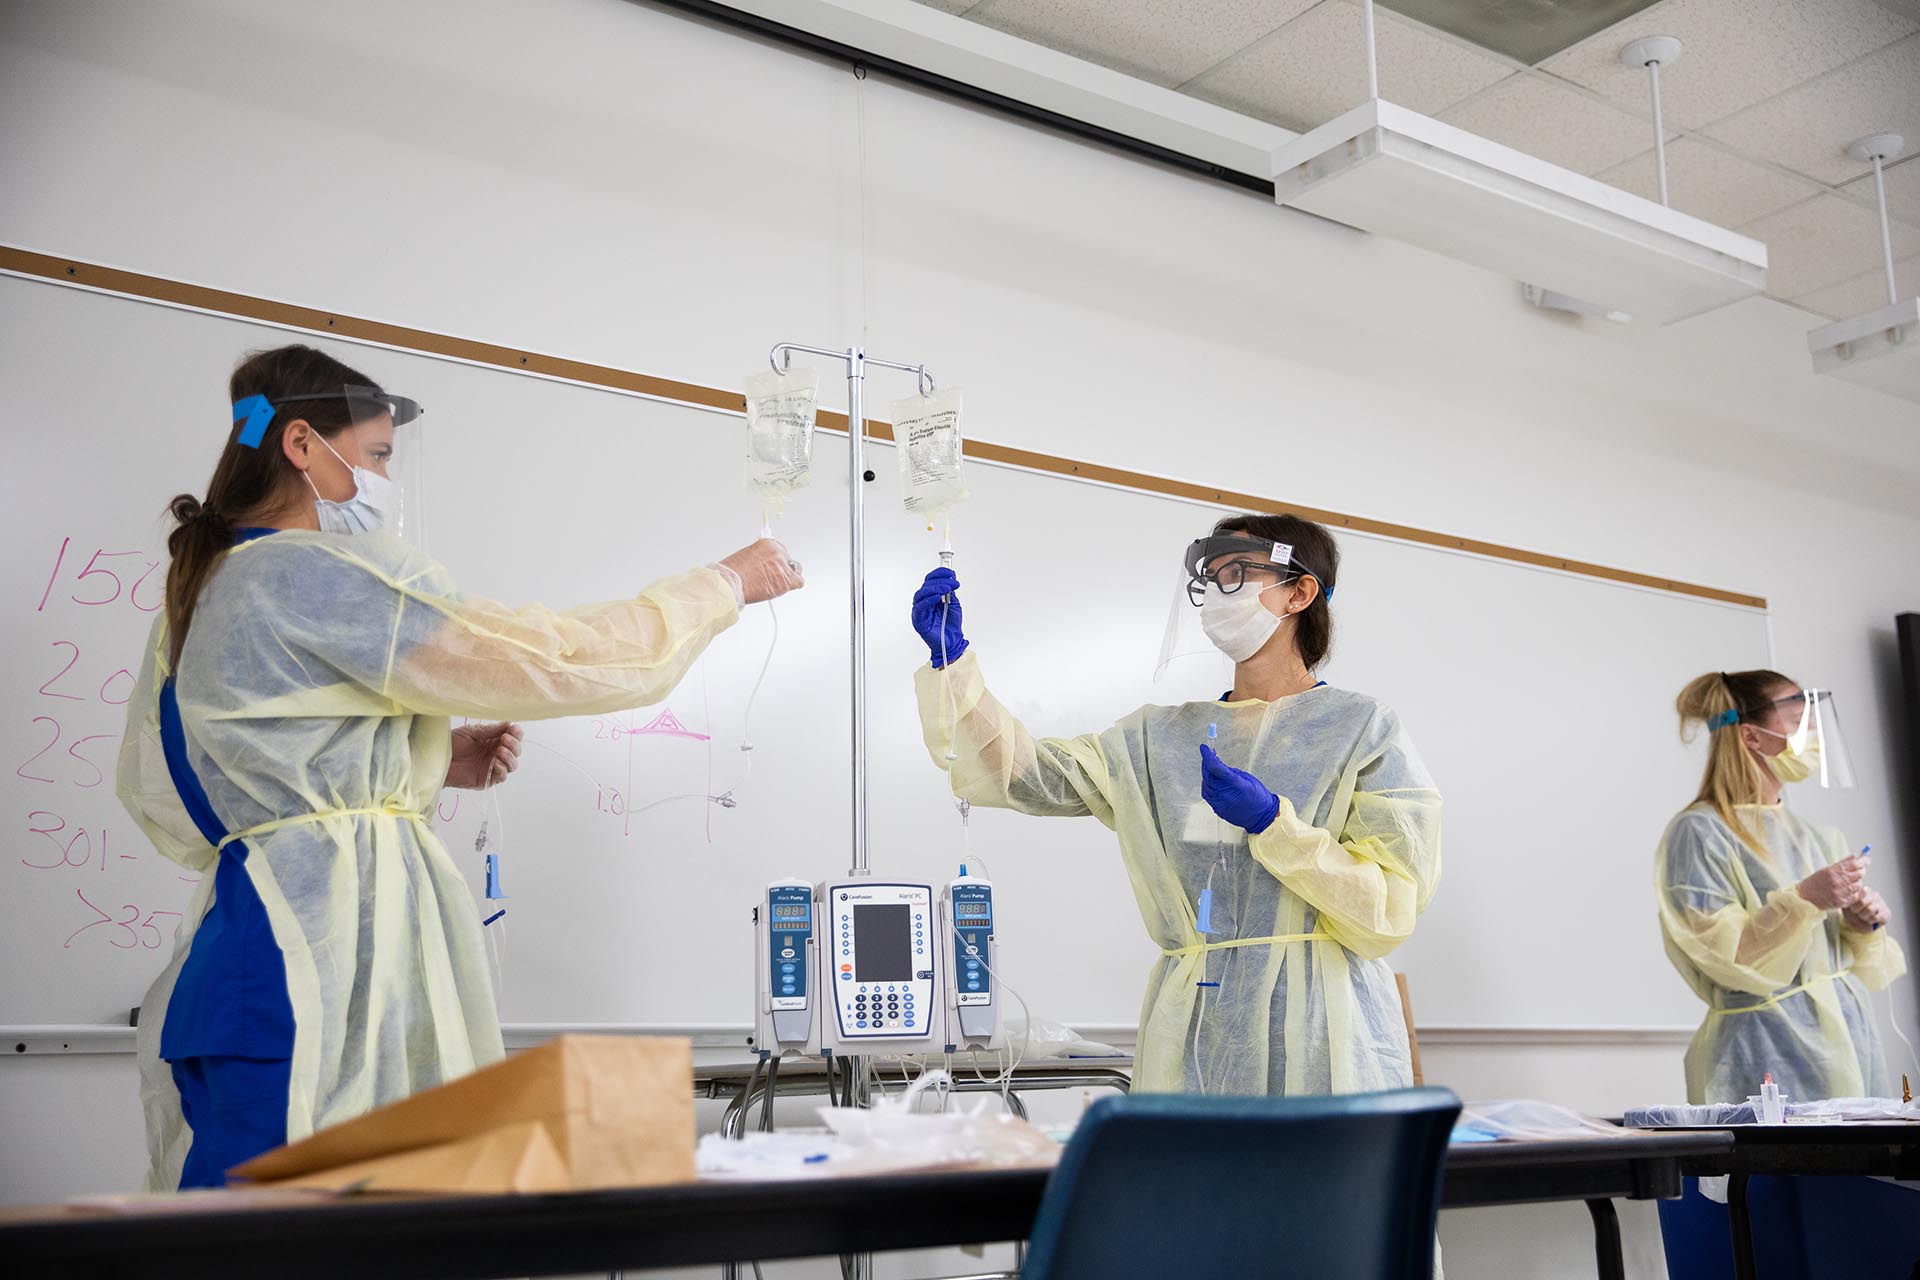 MSU Denver nursing students Victoria Whitley, left, Alexia Girin, and Erin Apple practice foundational hands on skills including priming tubing for IVs with instructor Jenny Bielefeld on Wednesday, April 22, 2020 in the Boulder Creek building on campus.